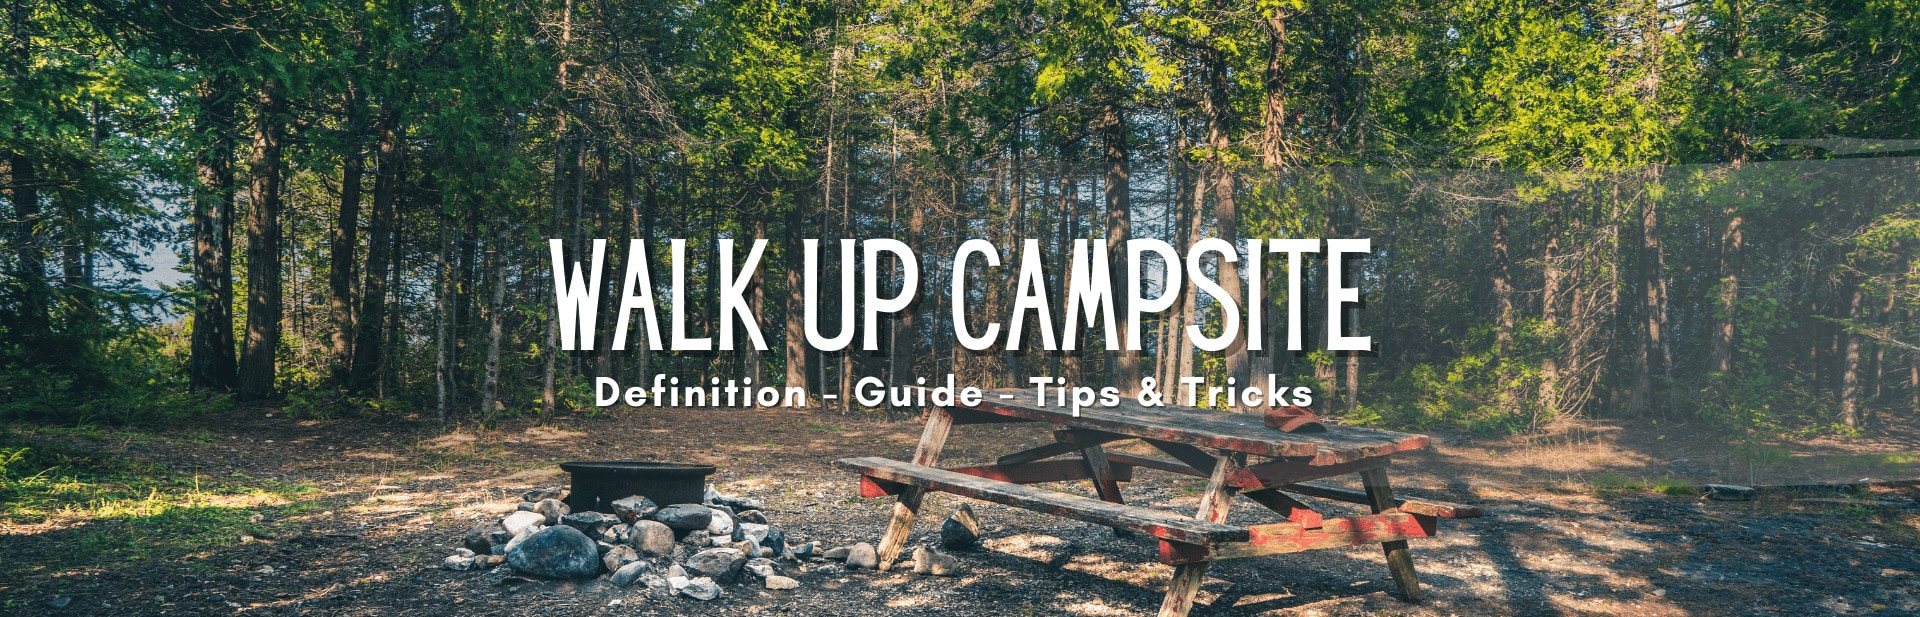 What Is A Walk Up Campsite?: Your Camping Questions Answered